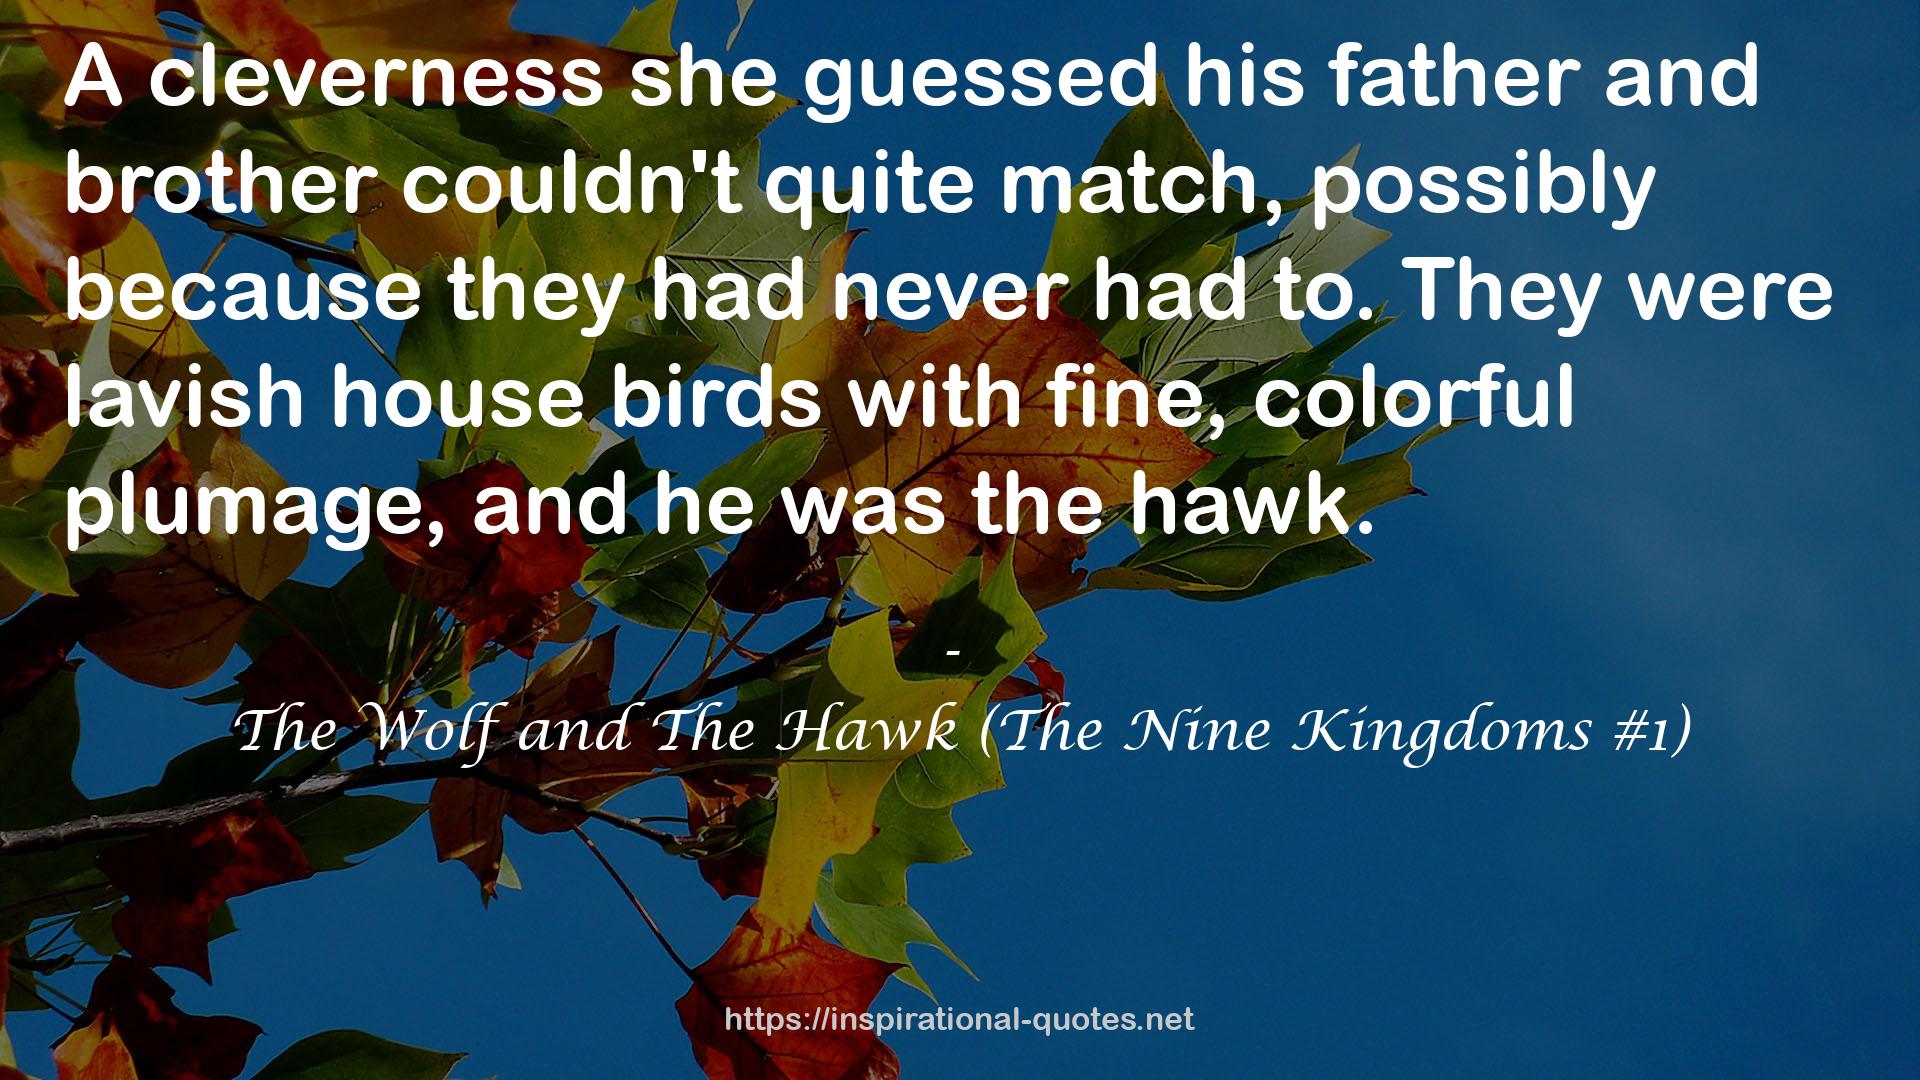 The Wolf and The Hawk (The Nine Kingdoms #1) QUOTES